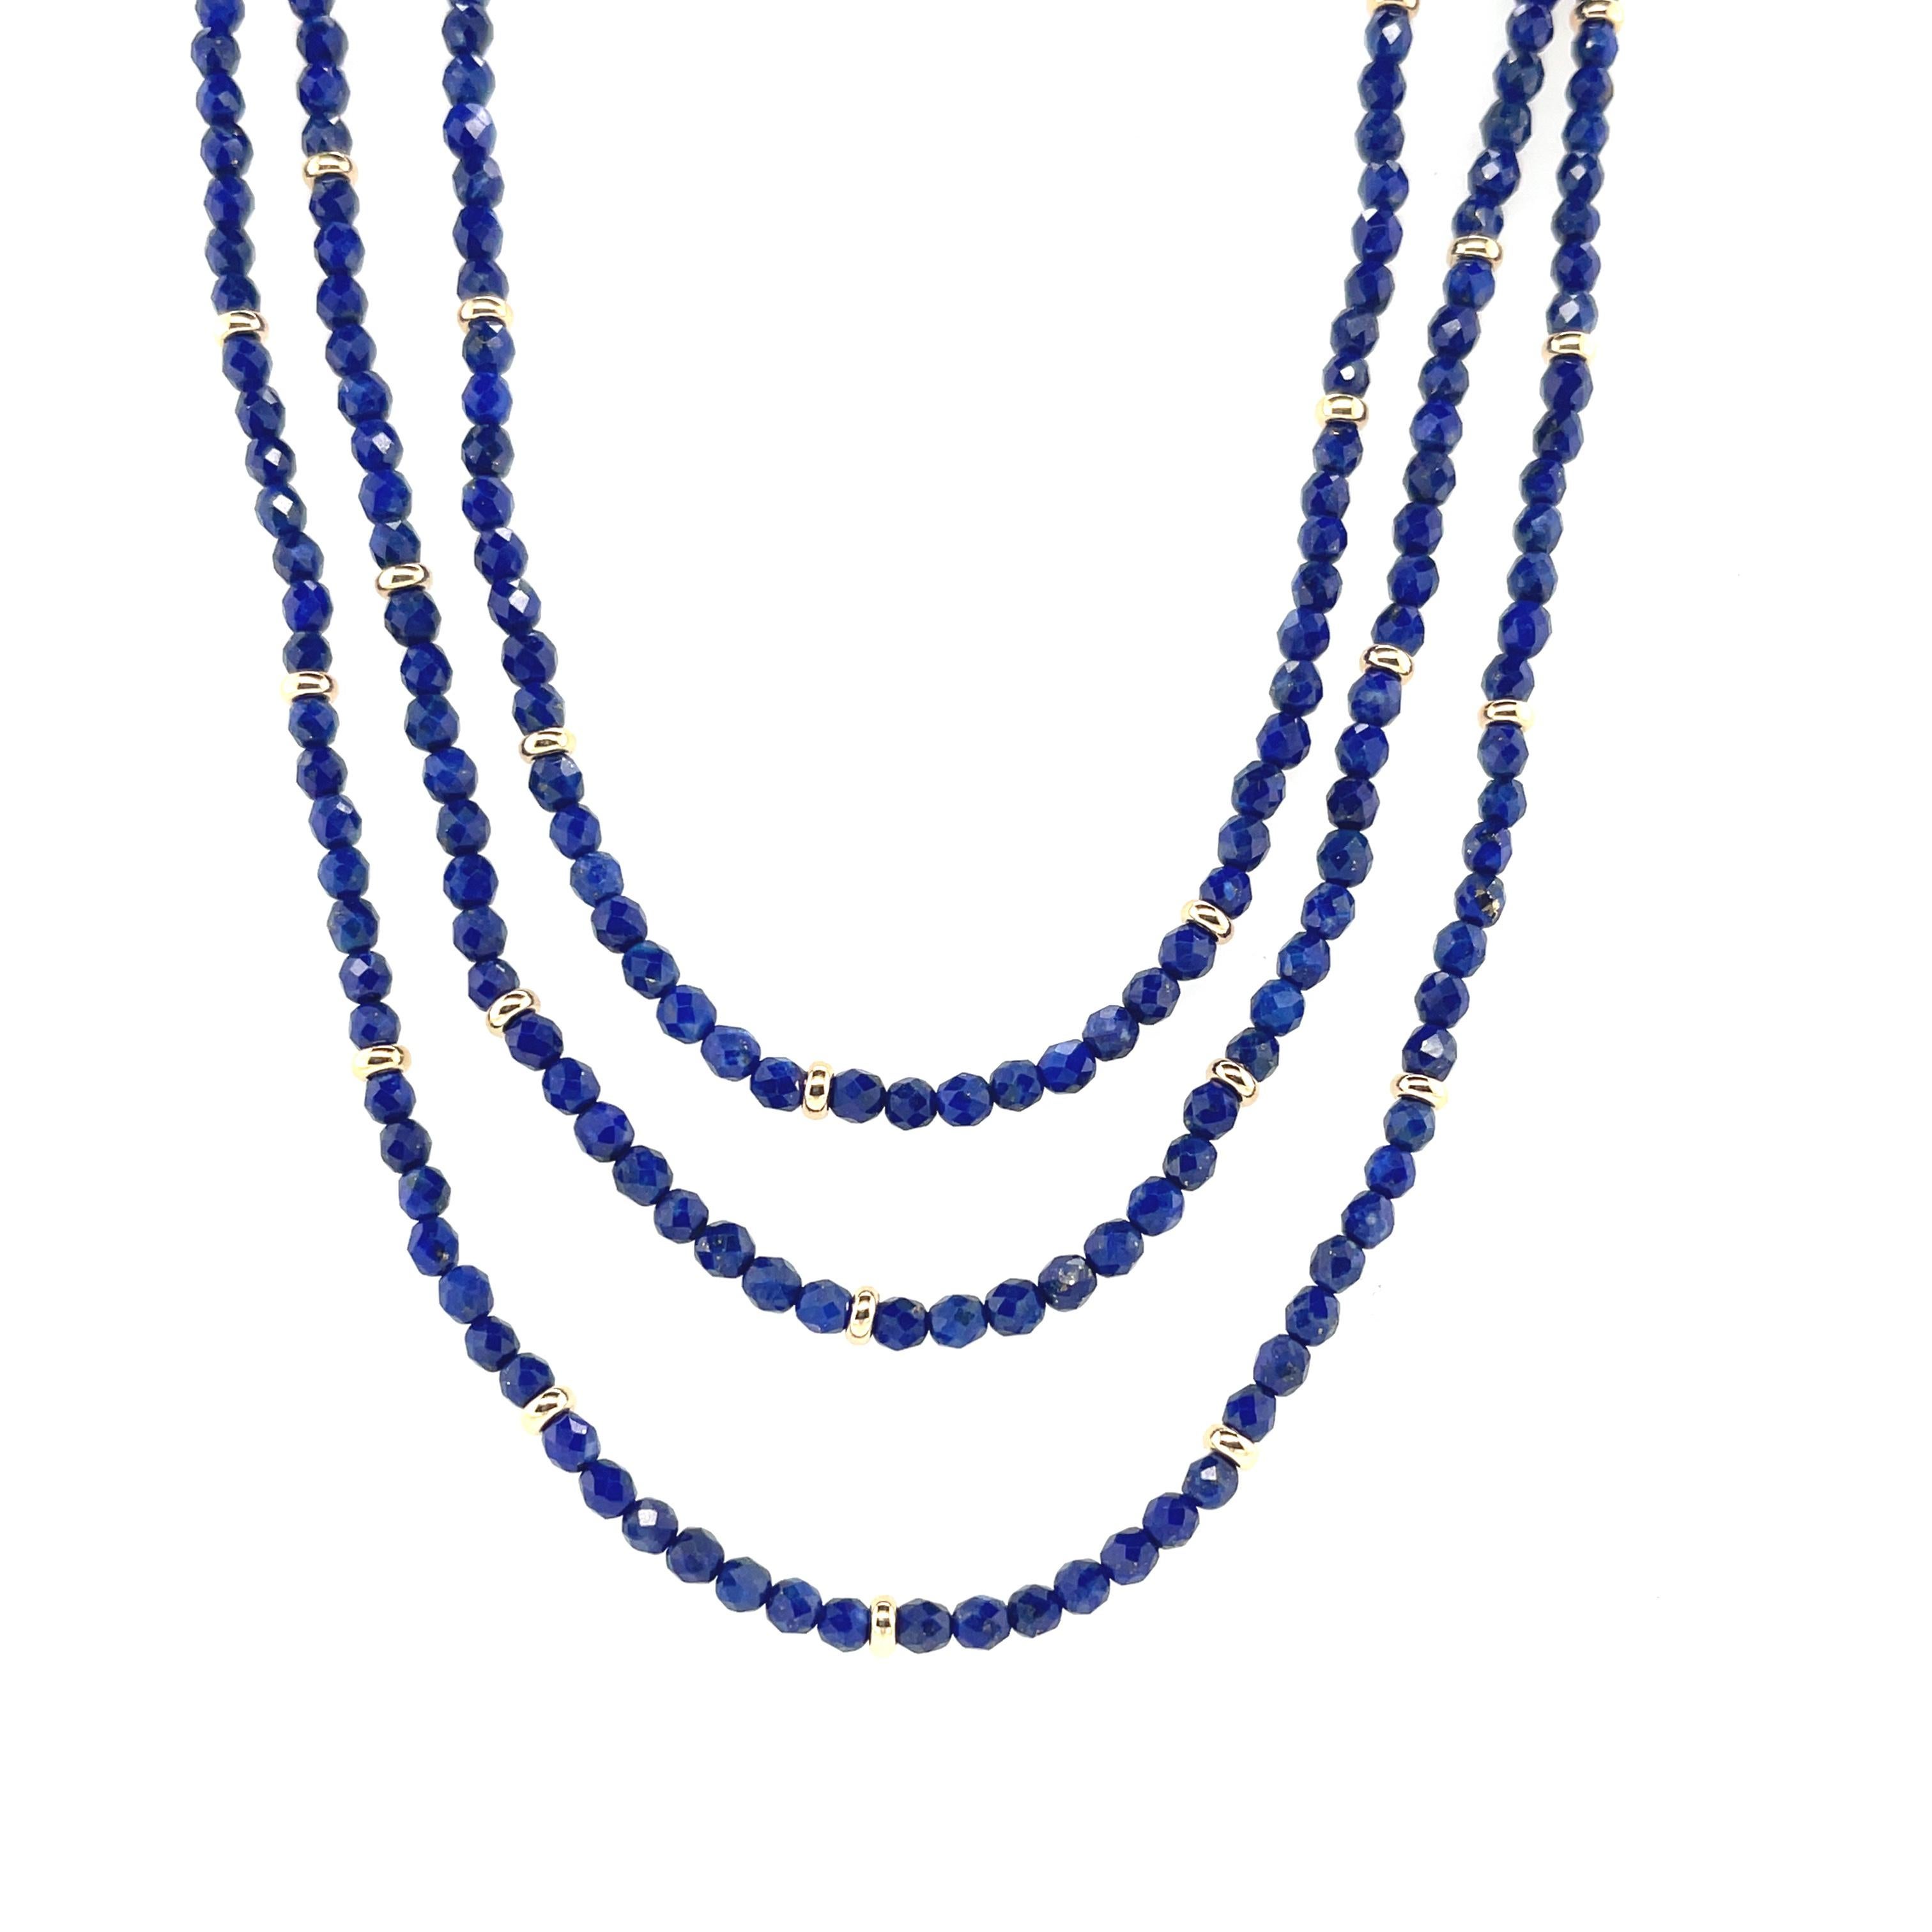 Artisan Faceted Lapis Bead Necklace with Yellow Gold Accents, 34 Inches